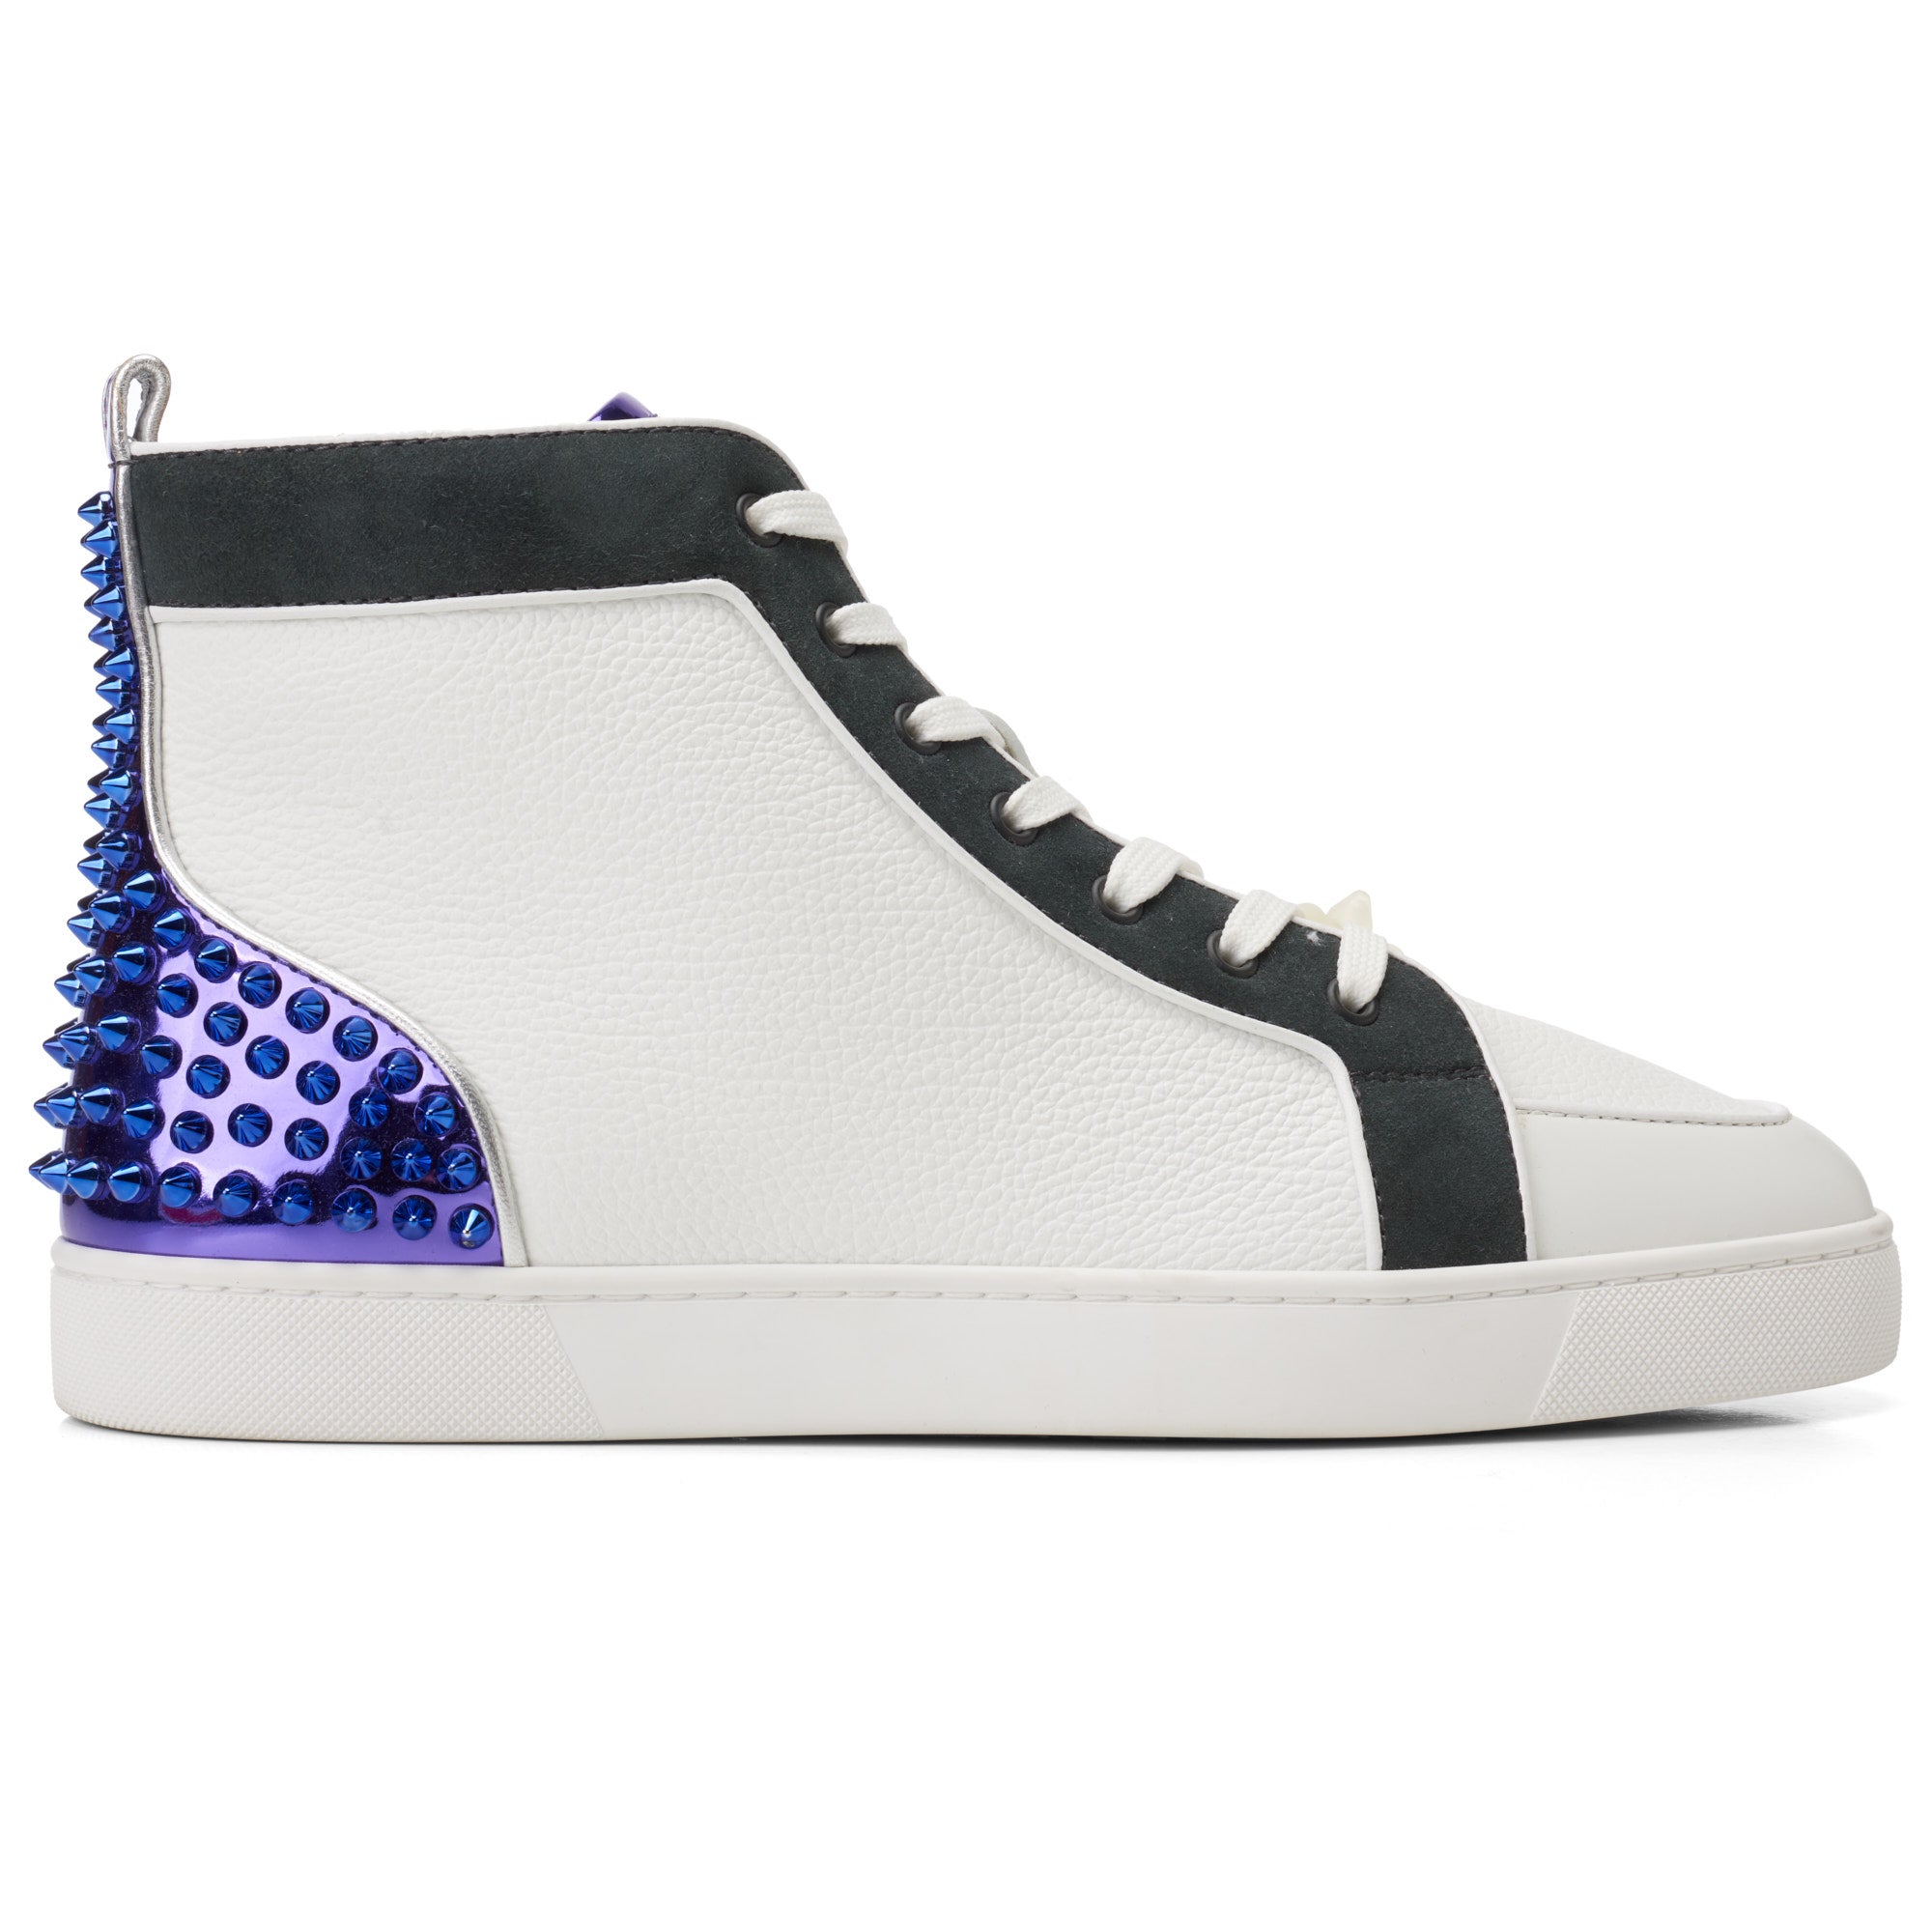 Christian LOUBOUTIN Rantus Spikes High Top Sneakers NEW US – SARTORIALE